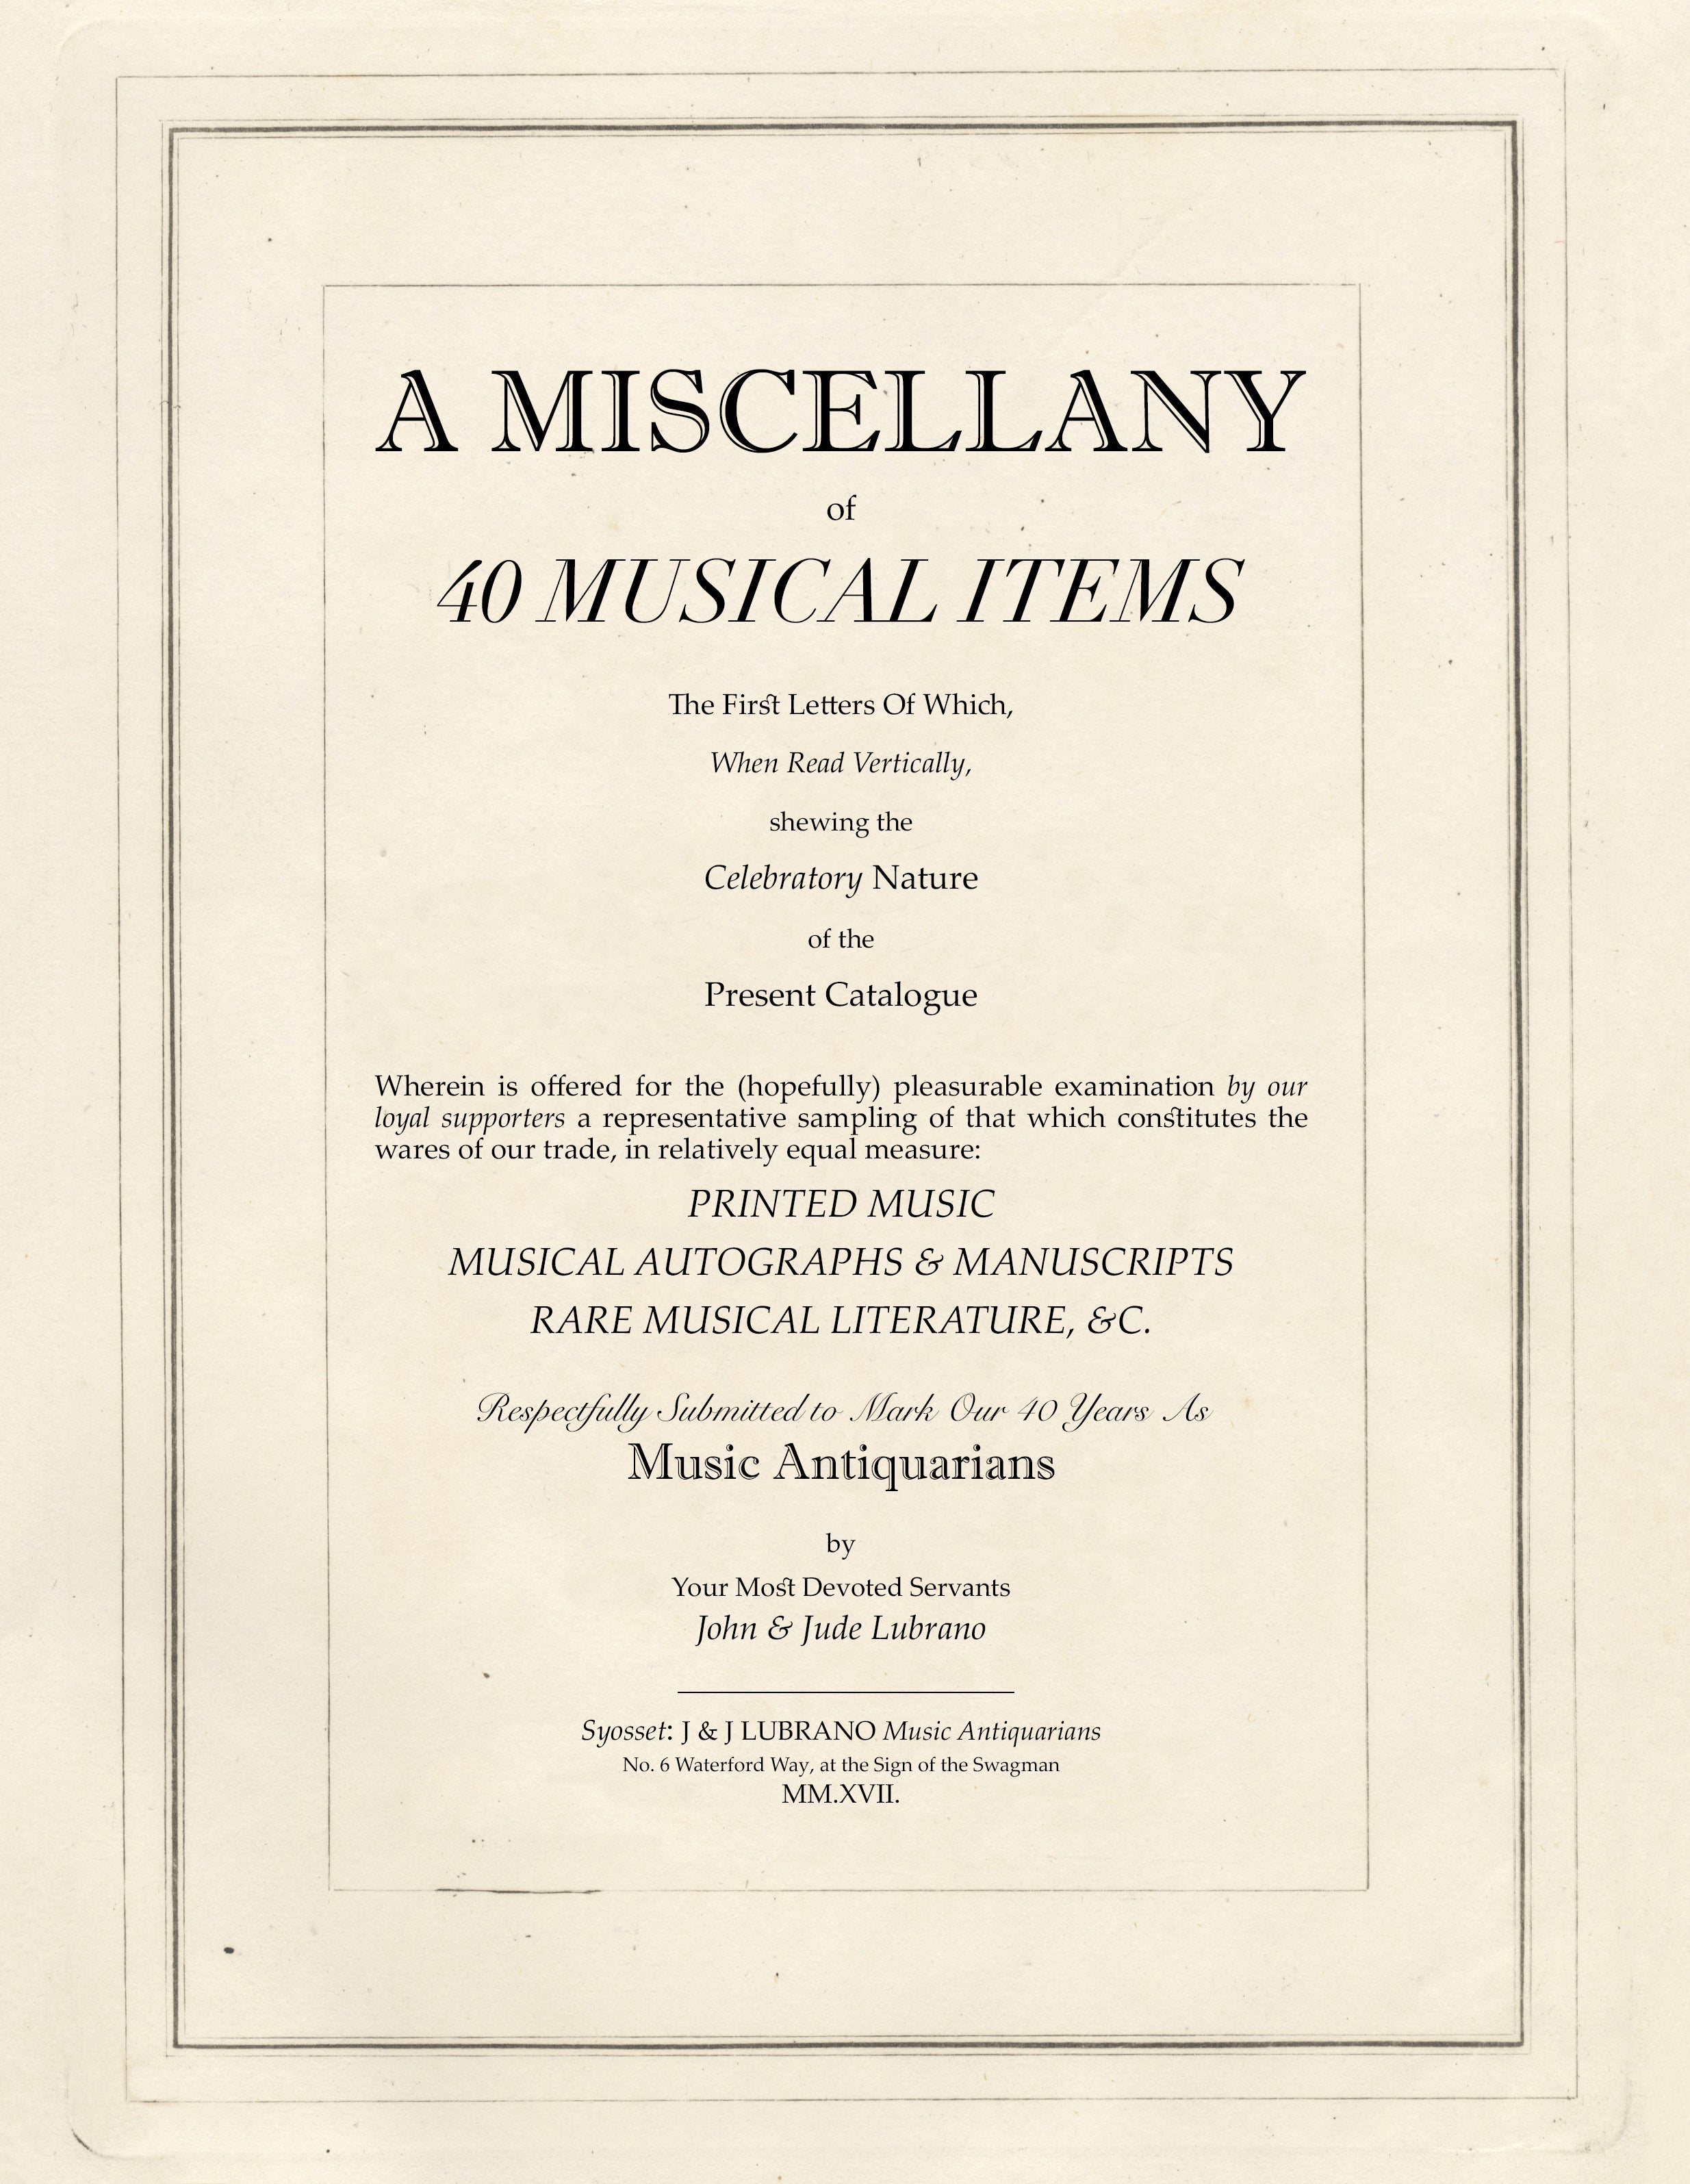 A Miscellany of 40 Musical Items